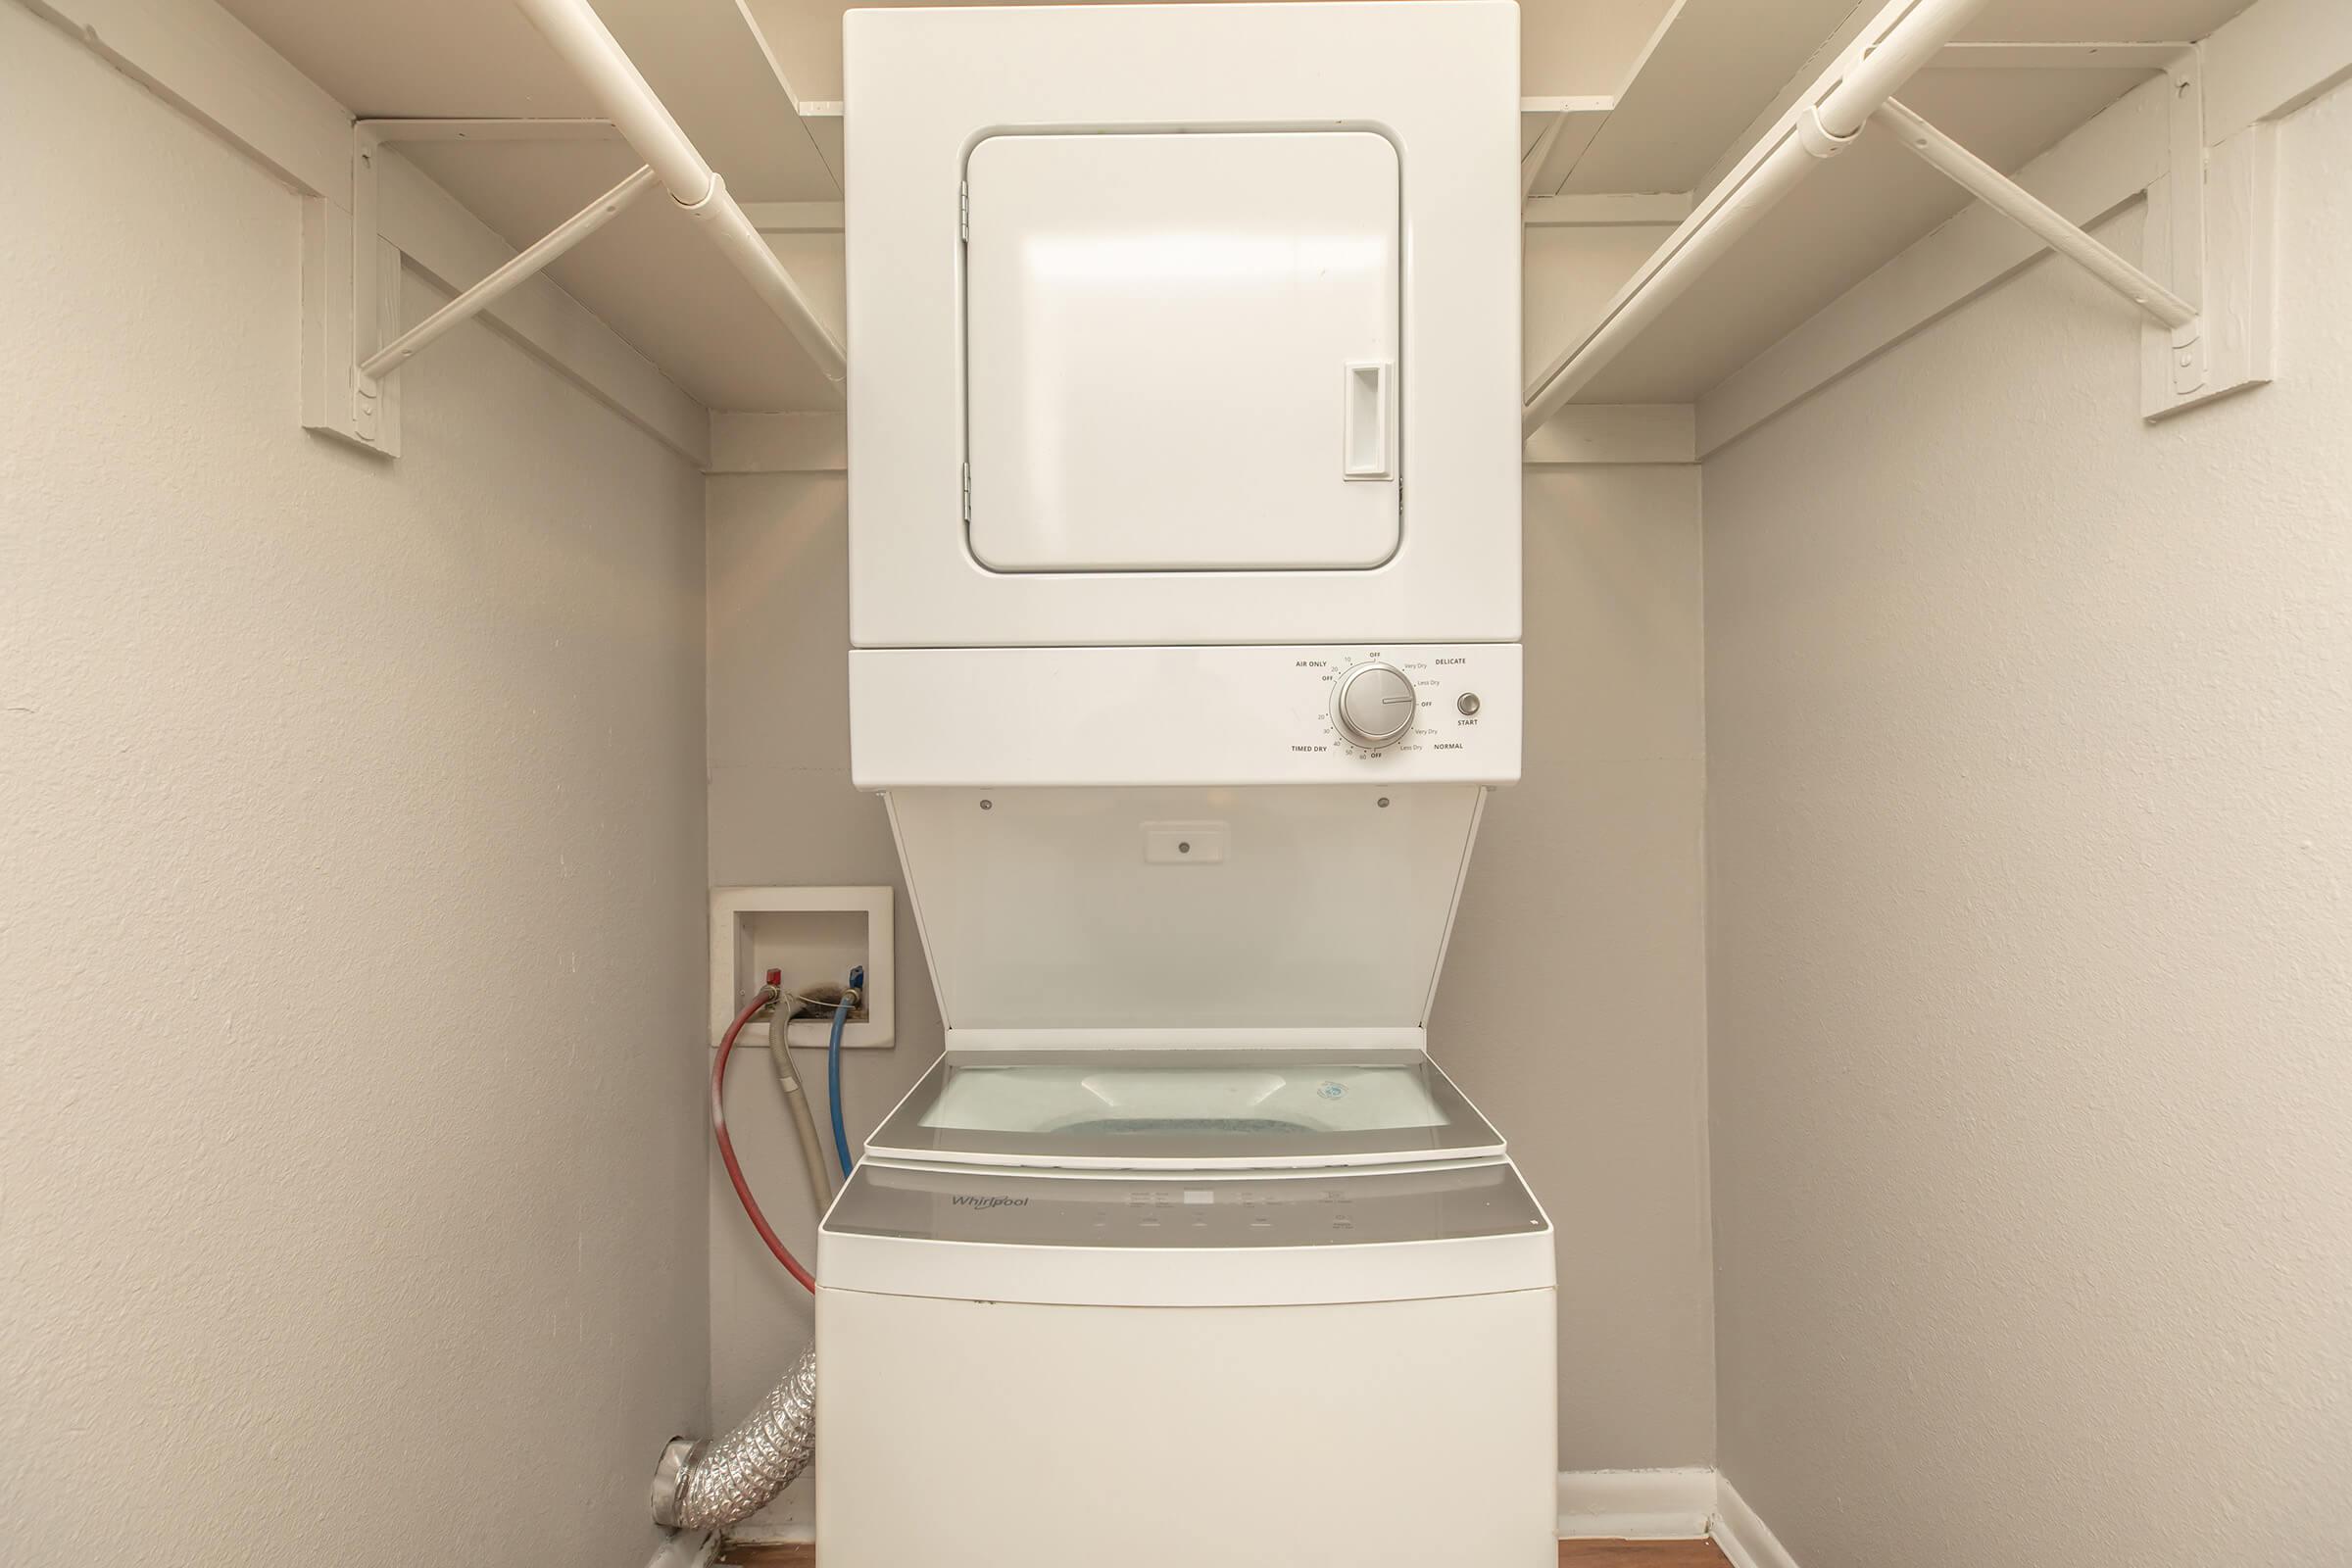 a refrigerator freezer sitting in a room